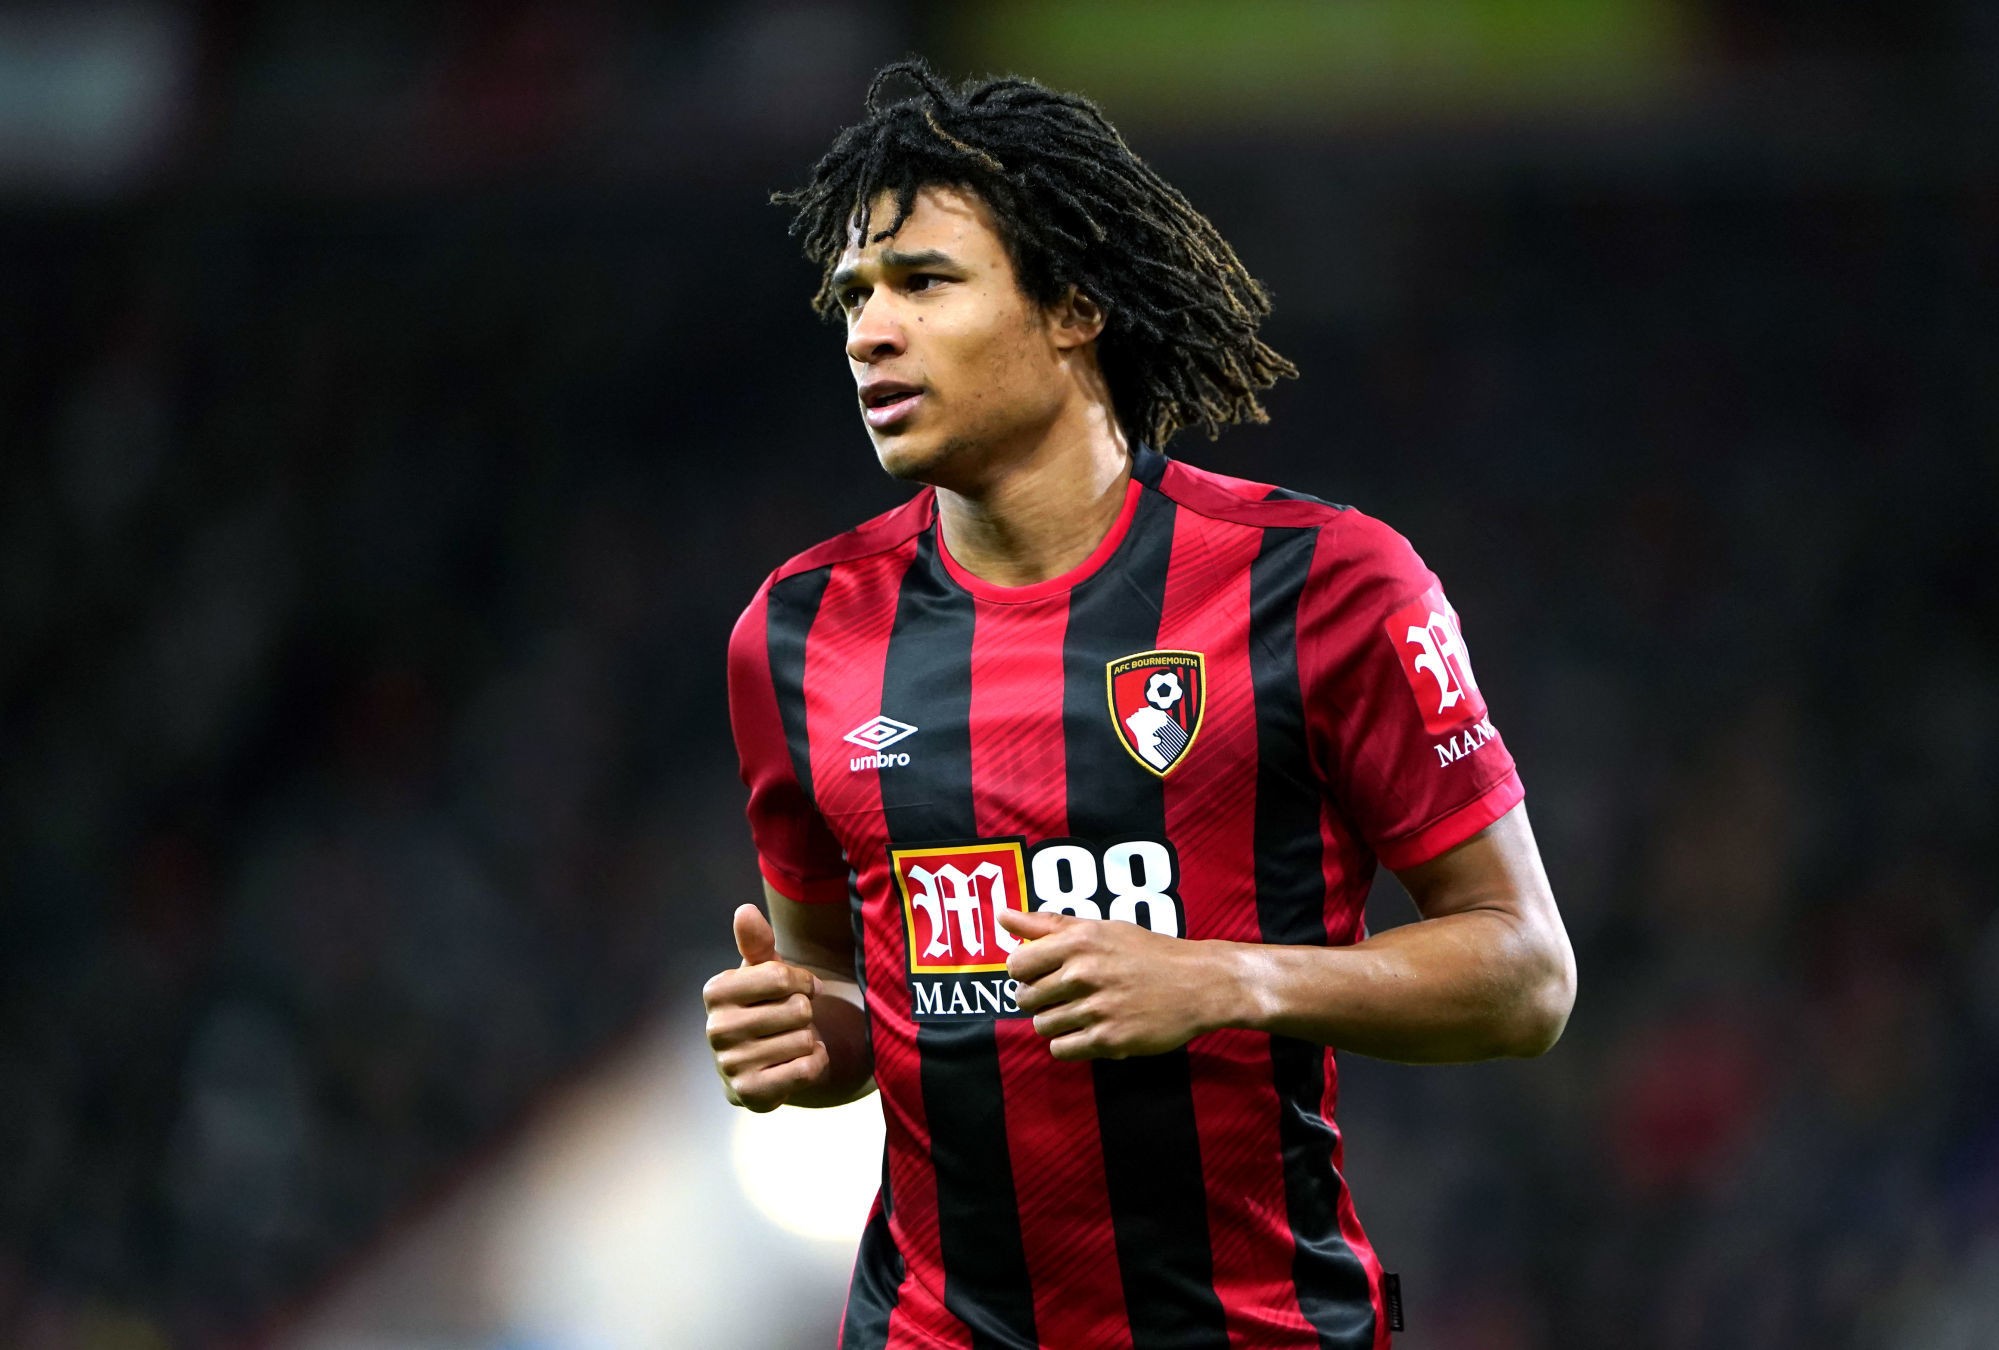 Photo by Icon Sport - Nathan AKE - Bournemouth (Angleterre)